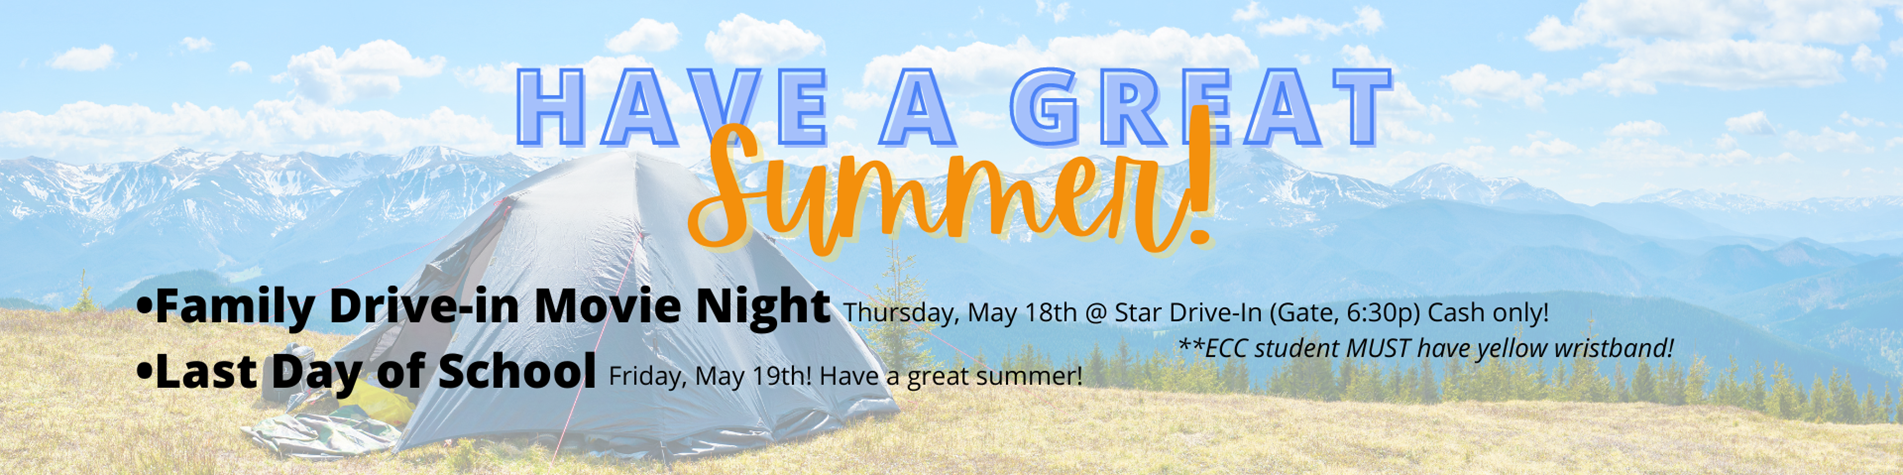 Star Drive-In Movie Night is Thursday May 18th, Last Day of Preschool is Friday May 19th